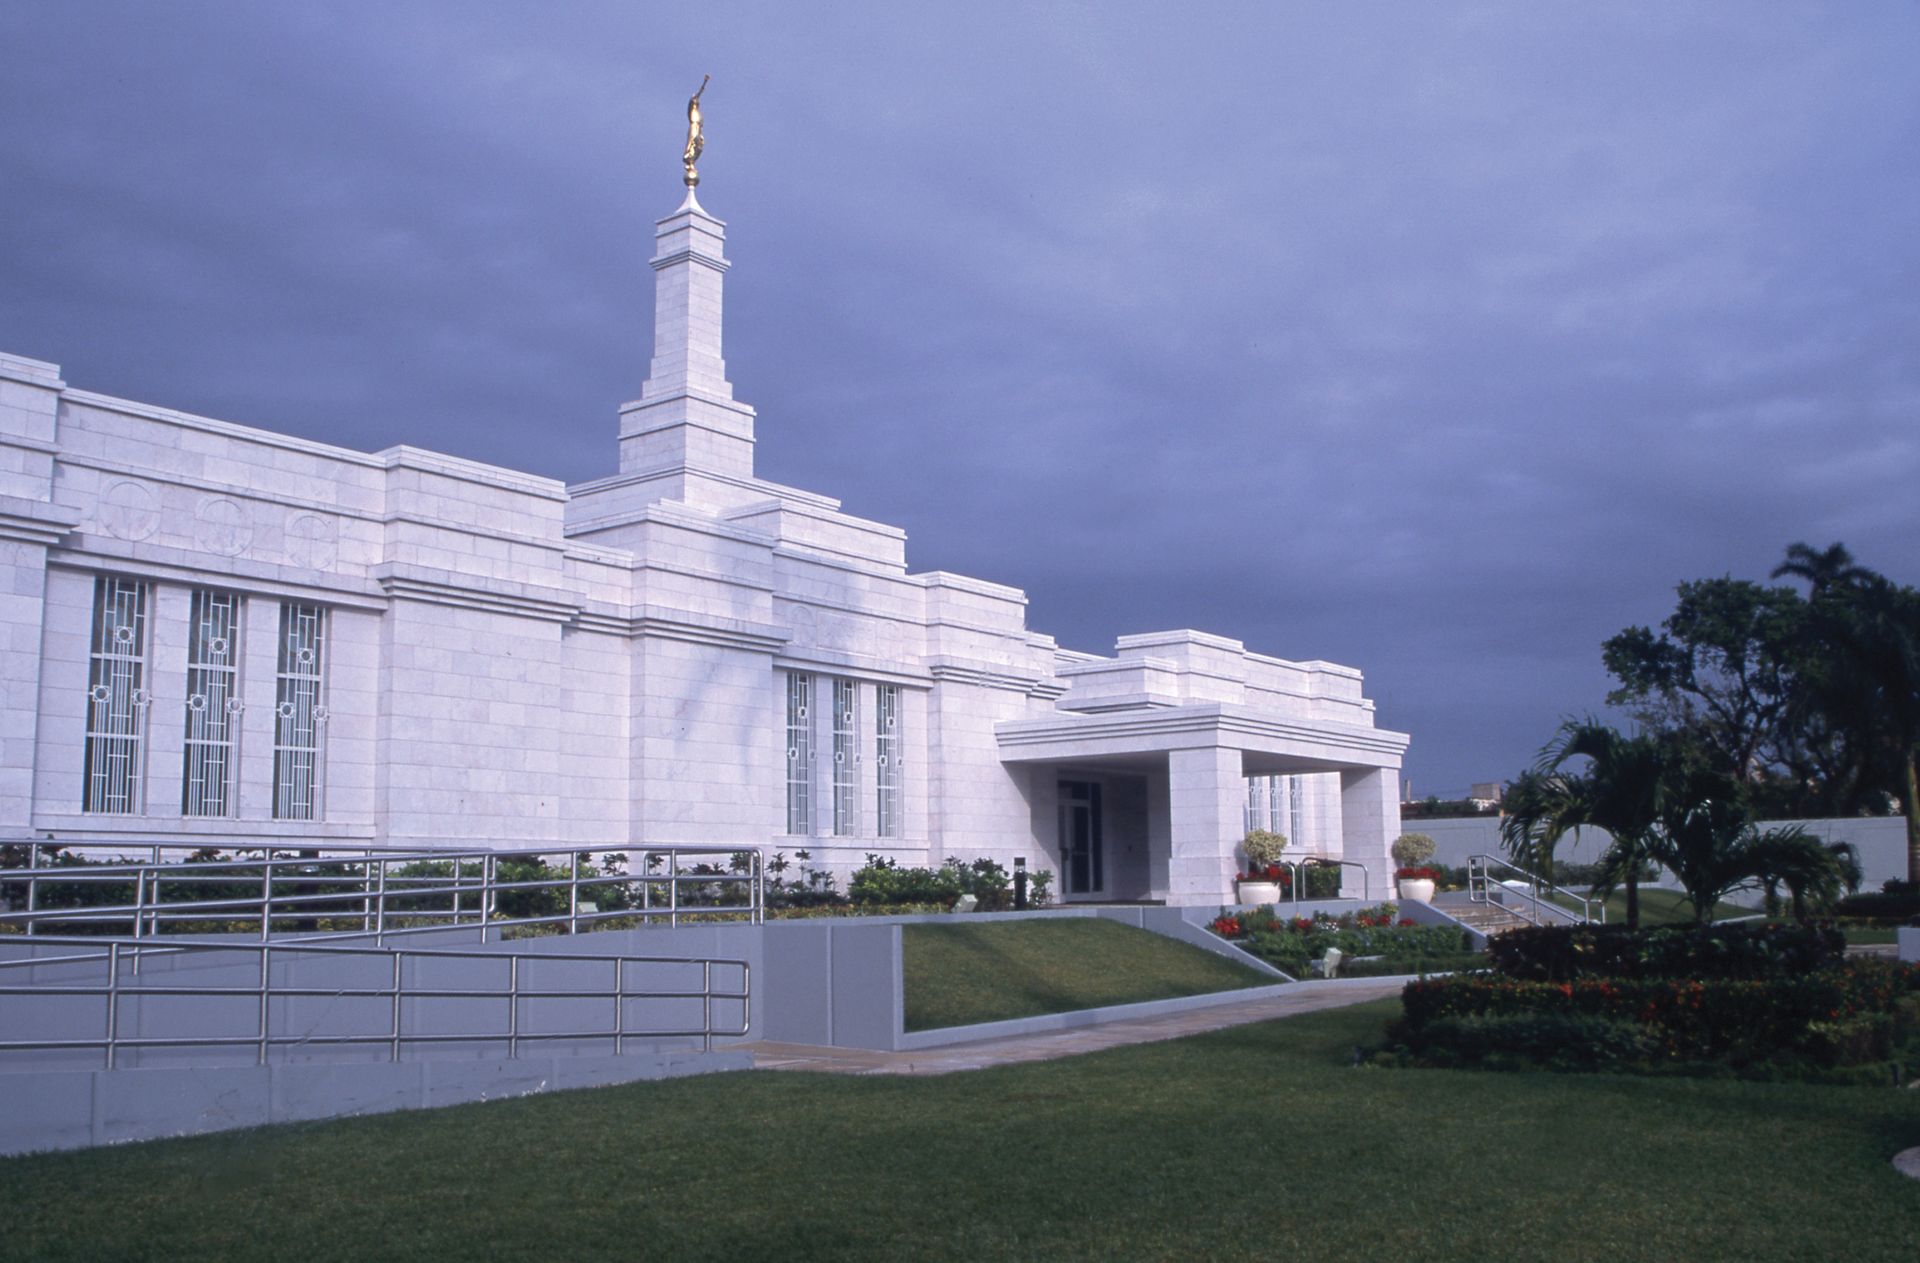 The Mérida Mexico Temple side view, including the entrance and scenery.